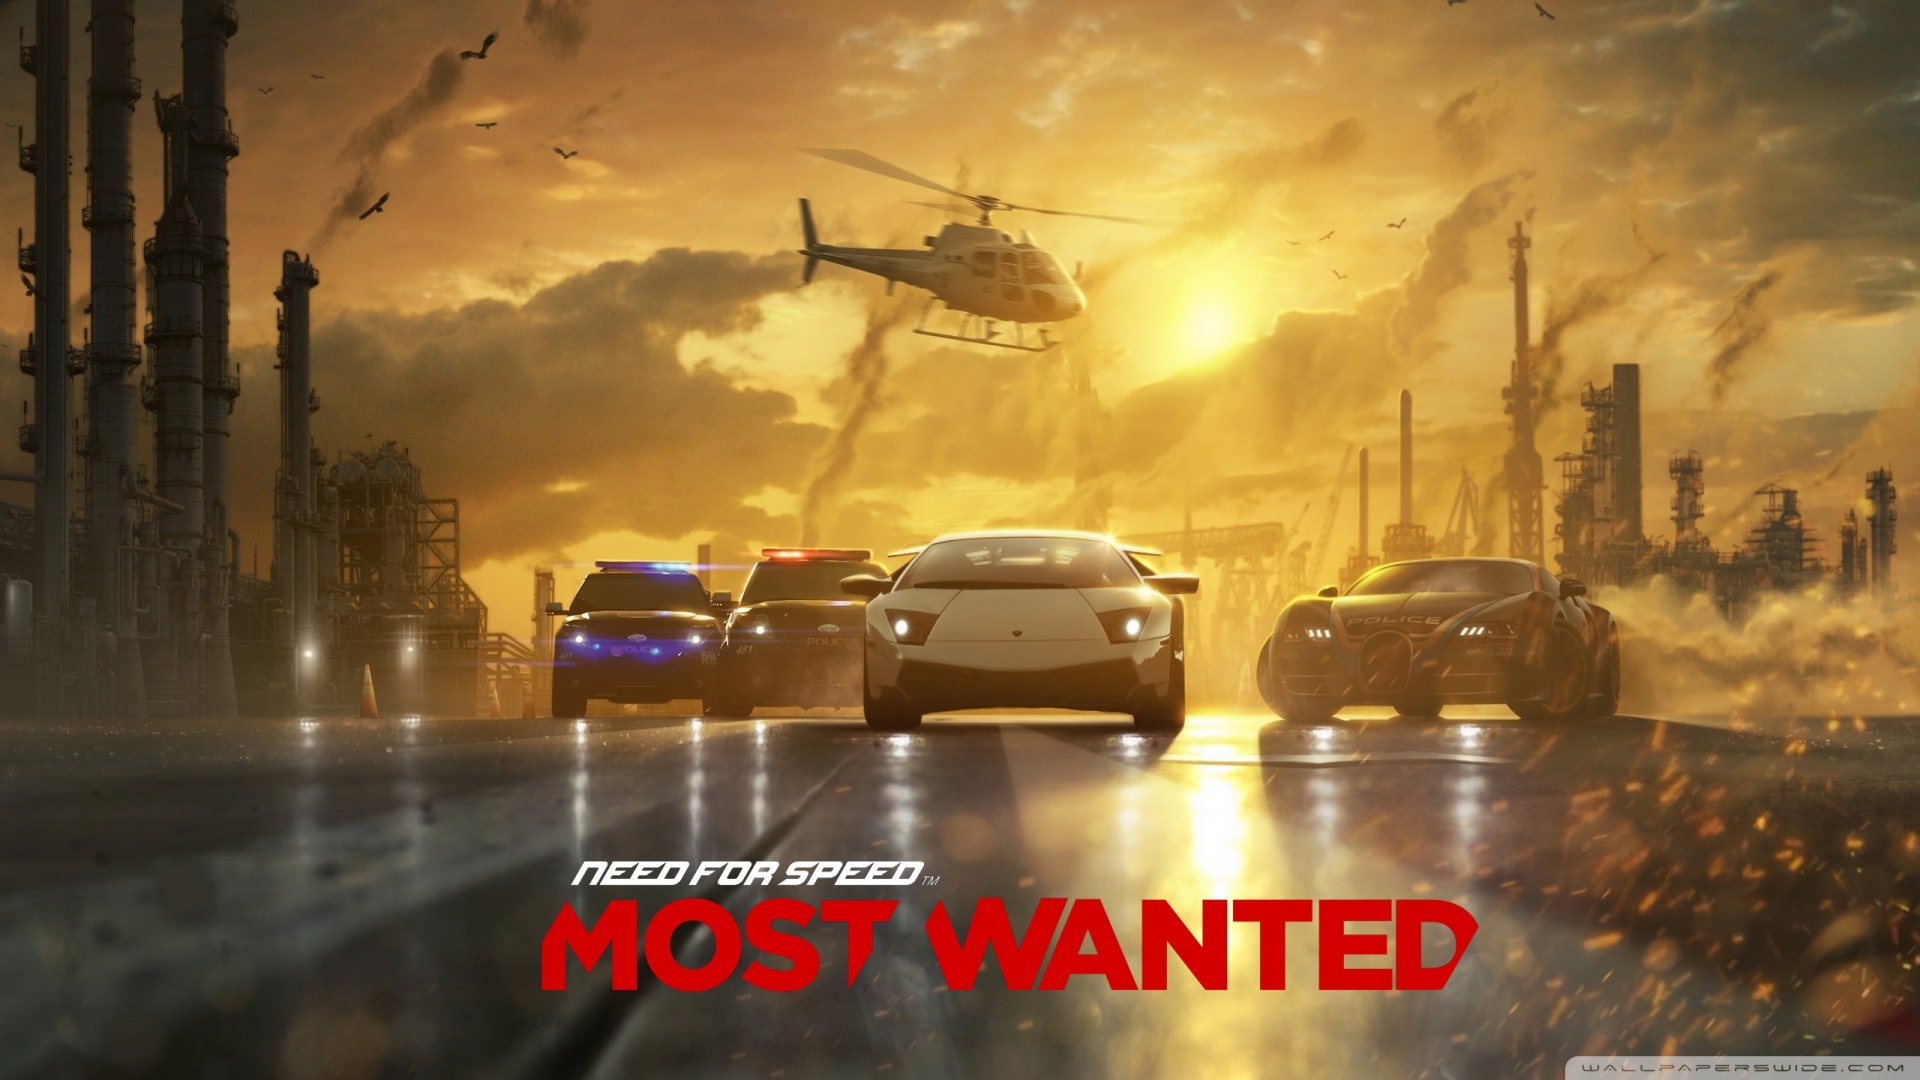 Nfs Most Wanted 2012 Wallpapers Hd - HD Wallpaper 